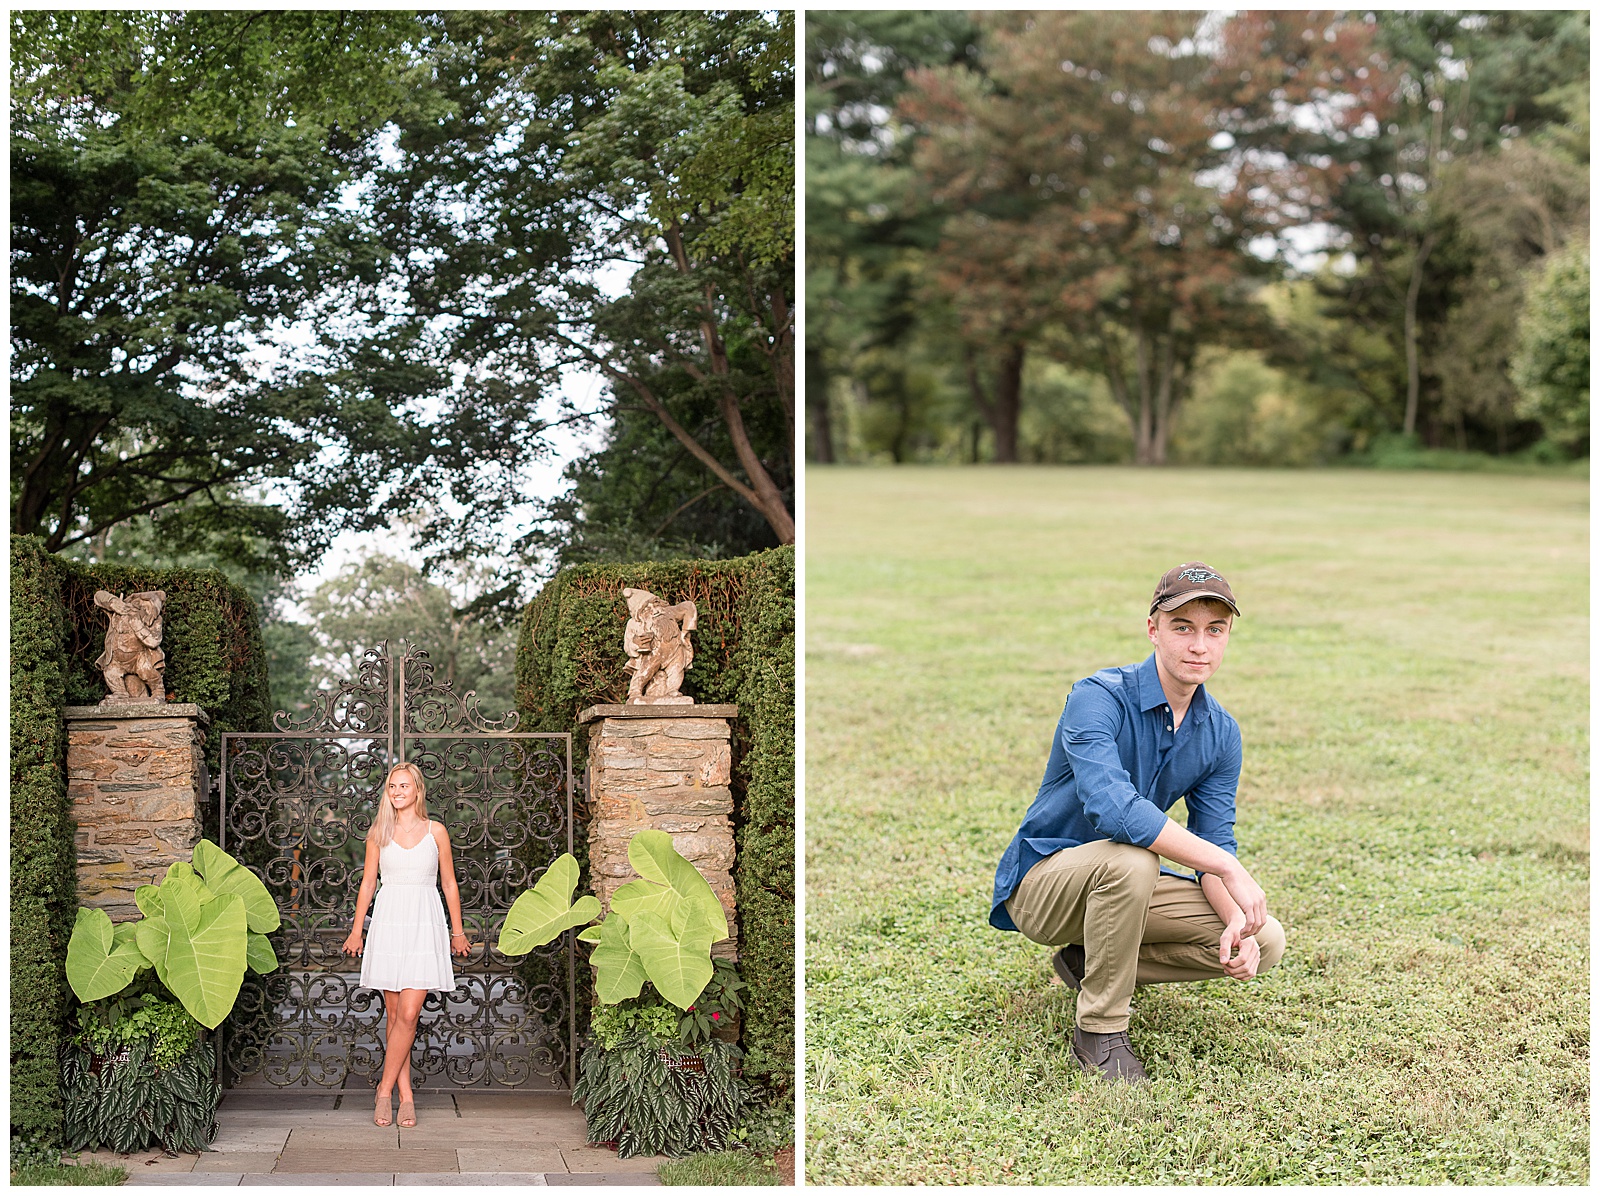 senior guy crouched towards ground in grass field and senior girl standing along elaborate gate